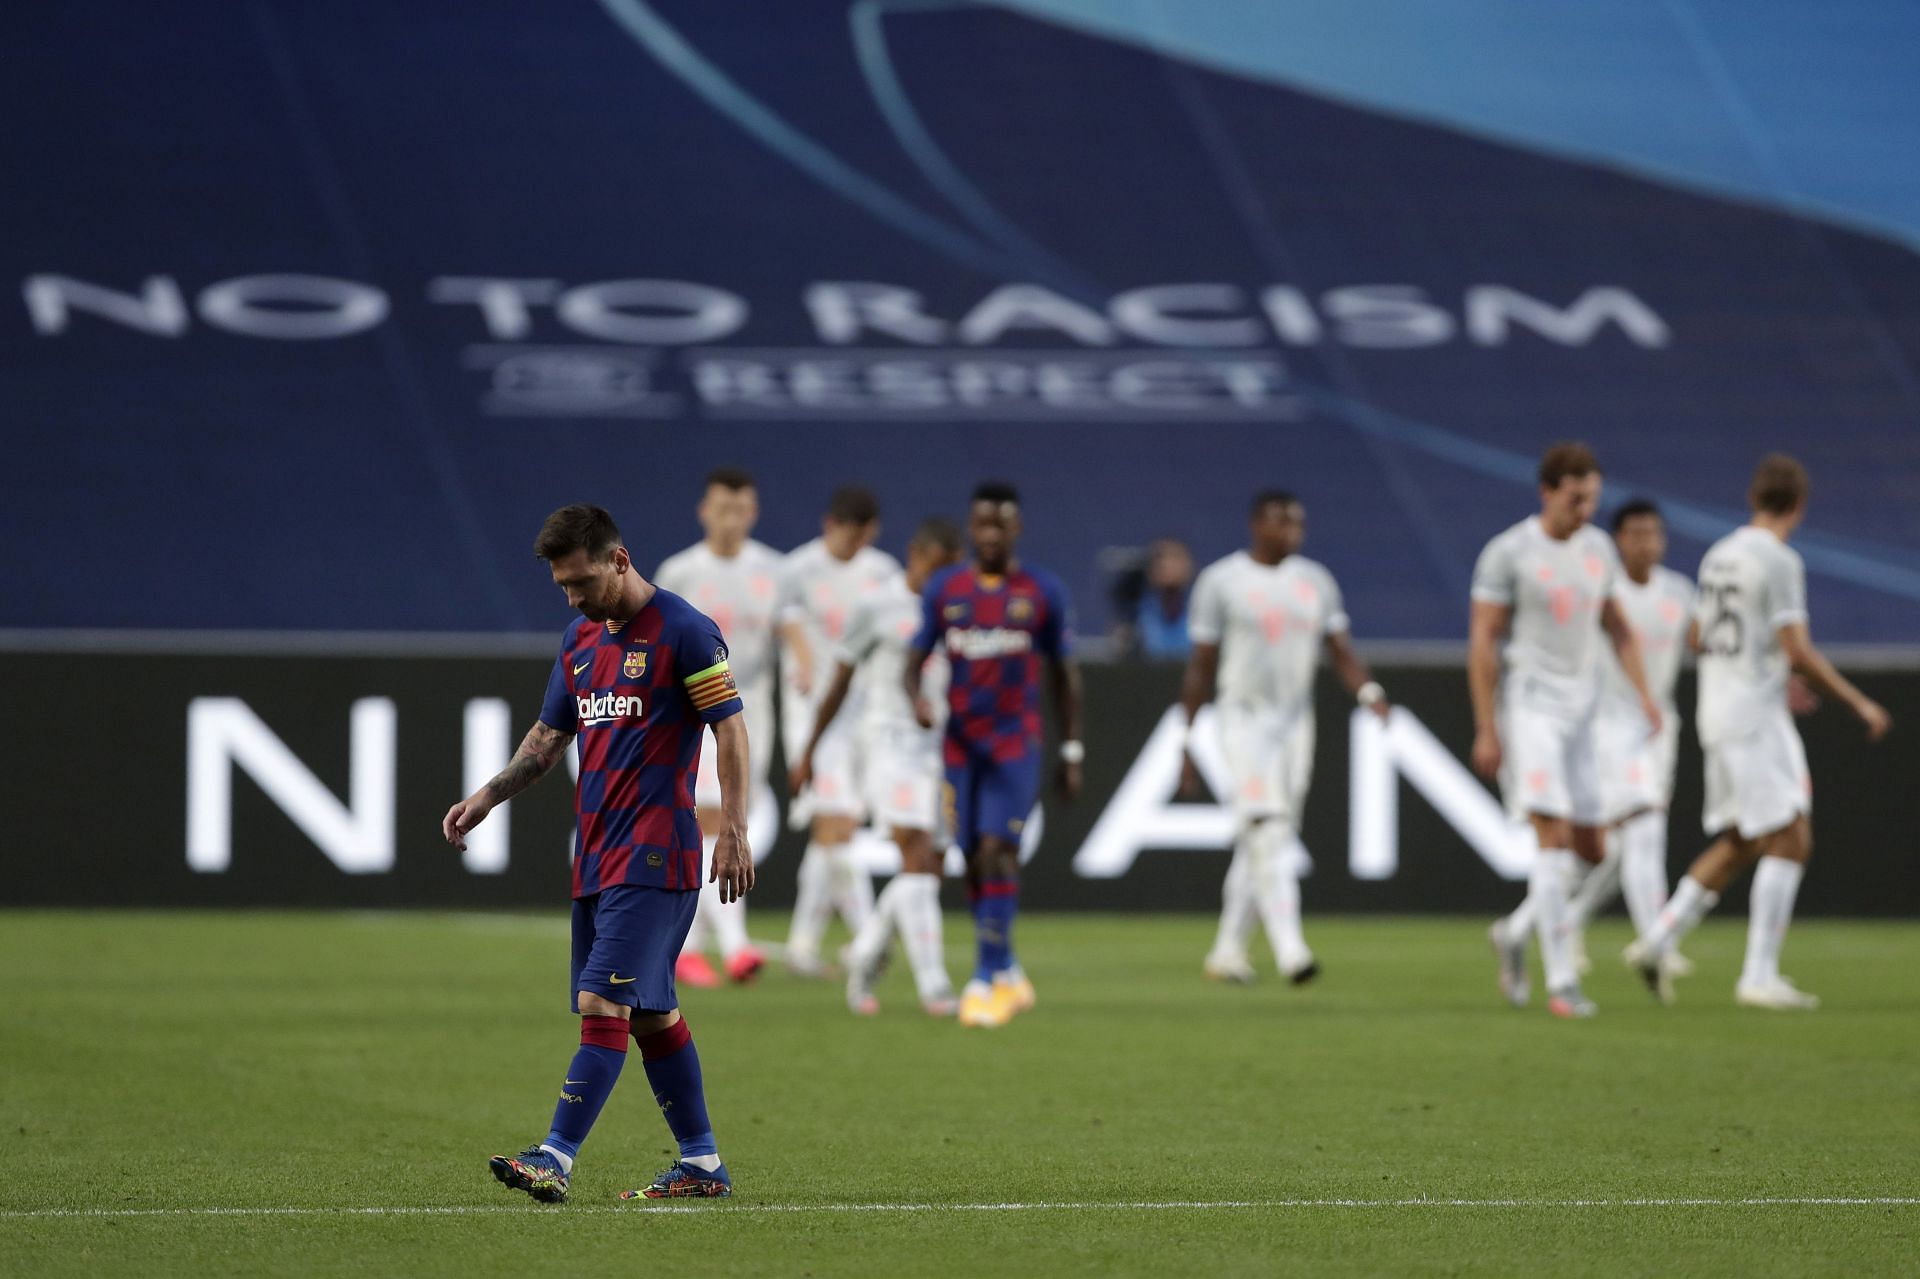 Lionel Messi captained the Blaugrana during their disastrous defeat.